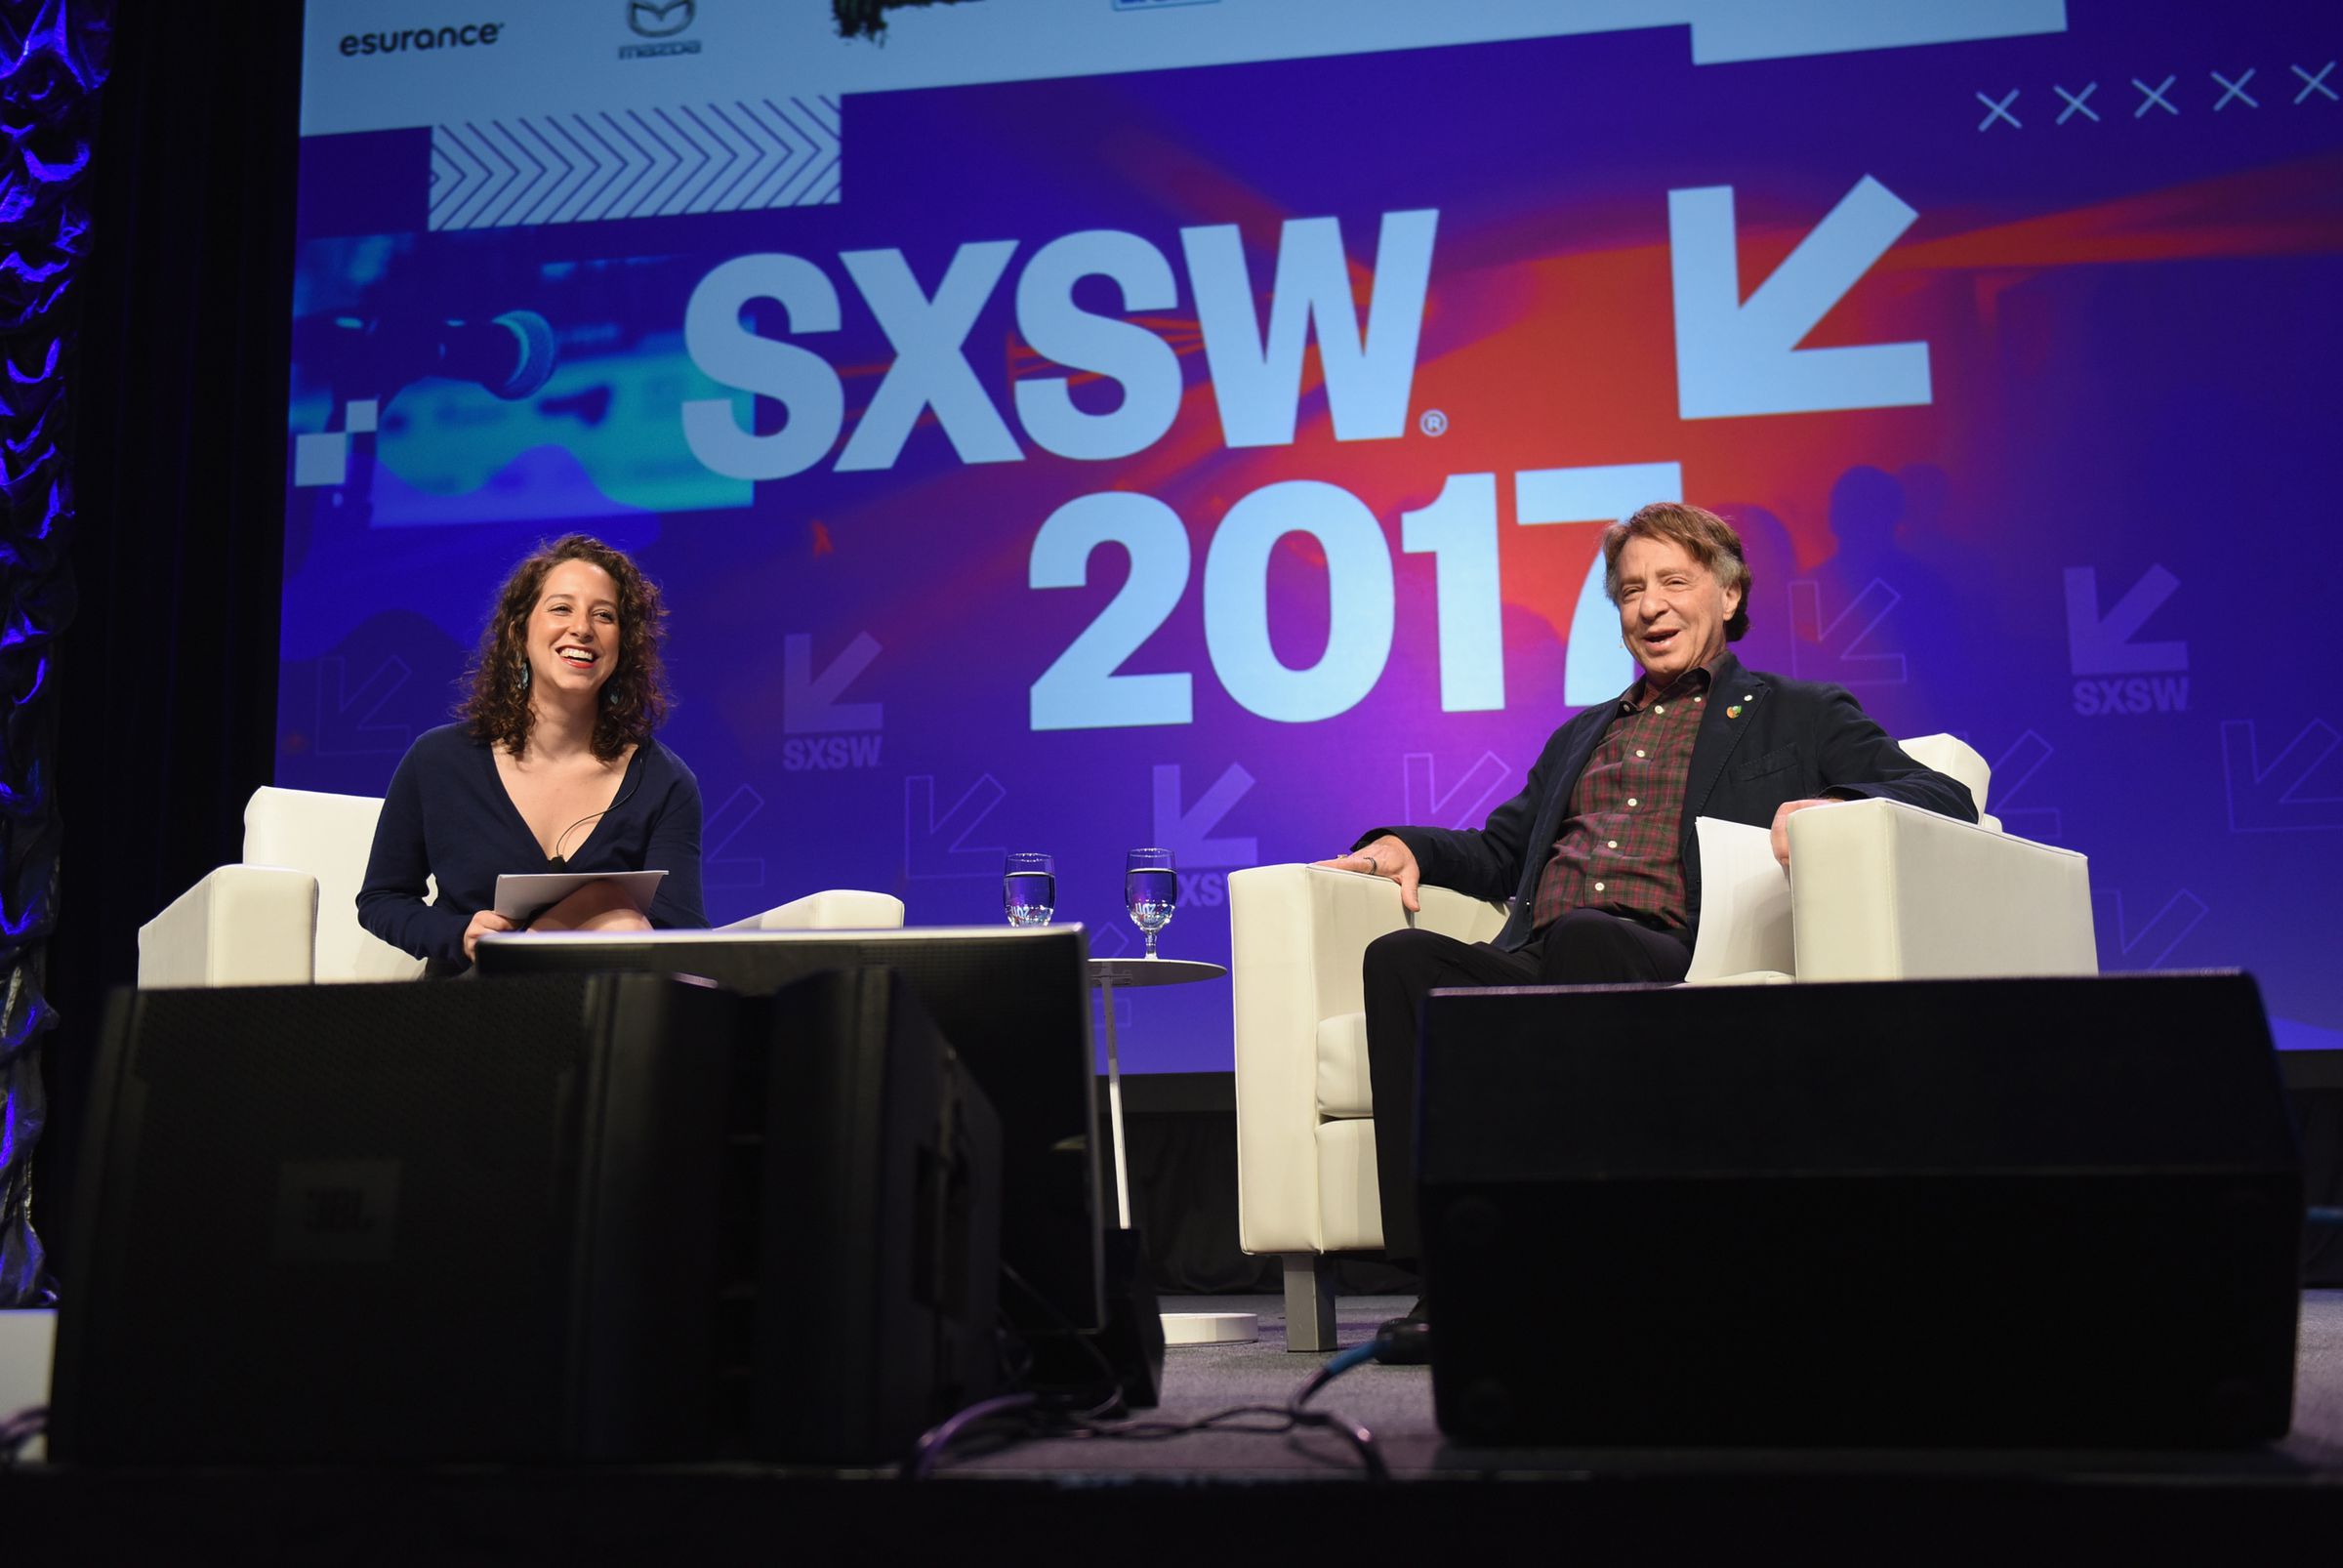 Ray Kurzweil and his daughter, cartoonist and author Amy Kurzweil, onstage at the SXSW Interactive festival on Monday, March 13th. 